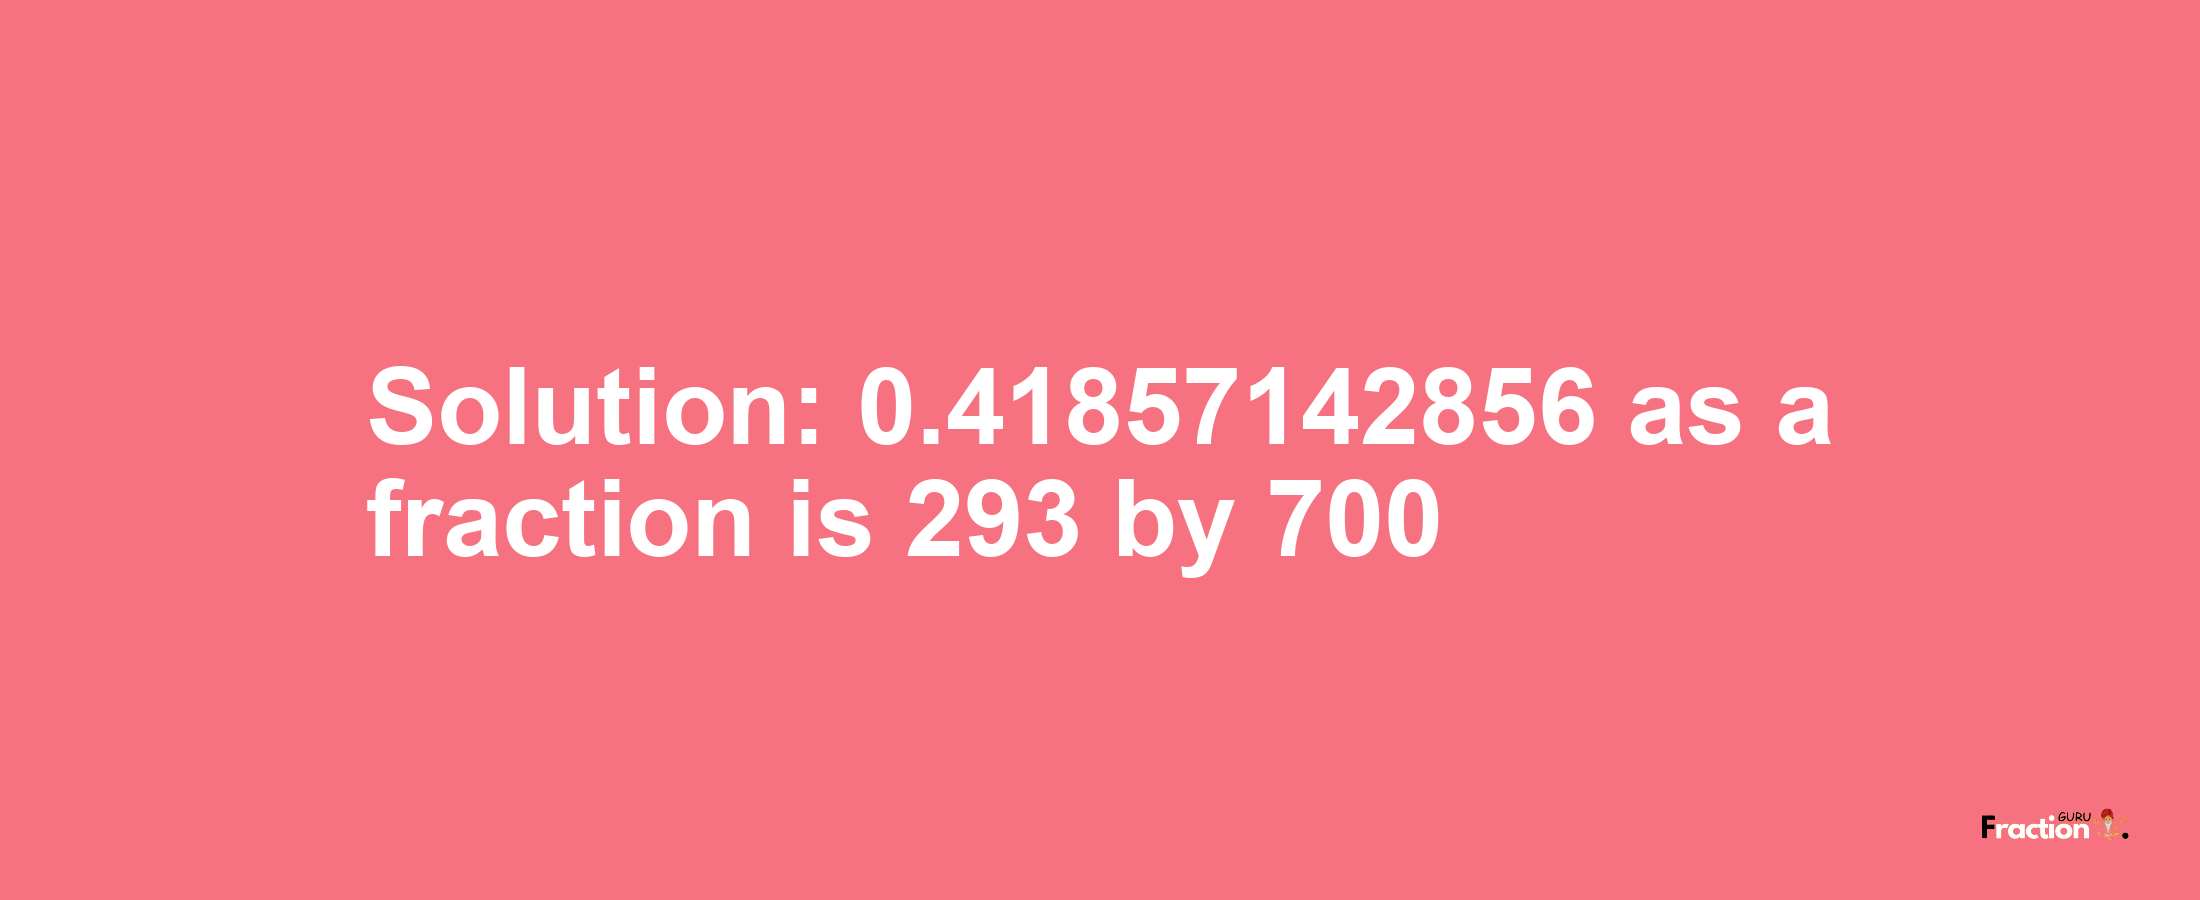 Solution:0.41857142856 as a fraction is 293/700